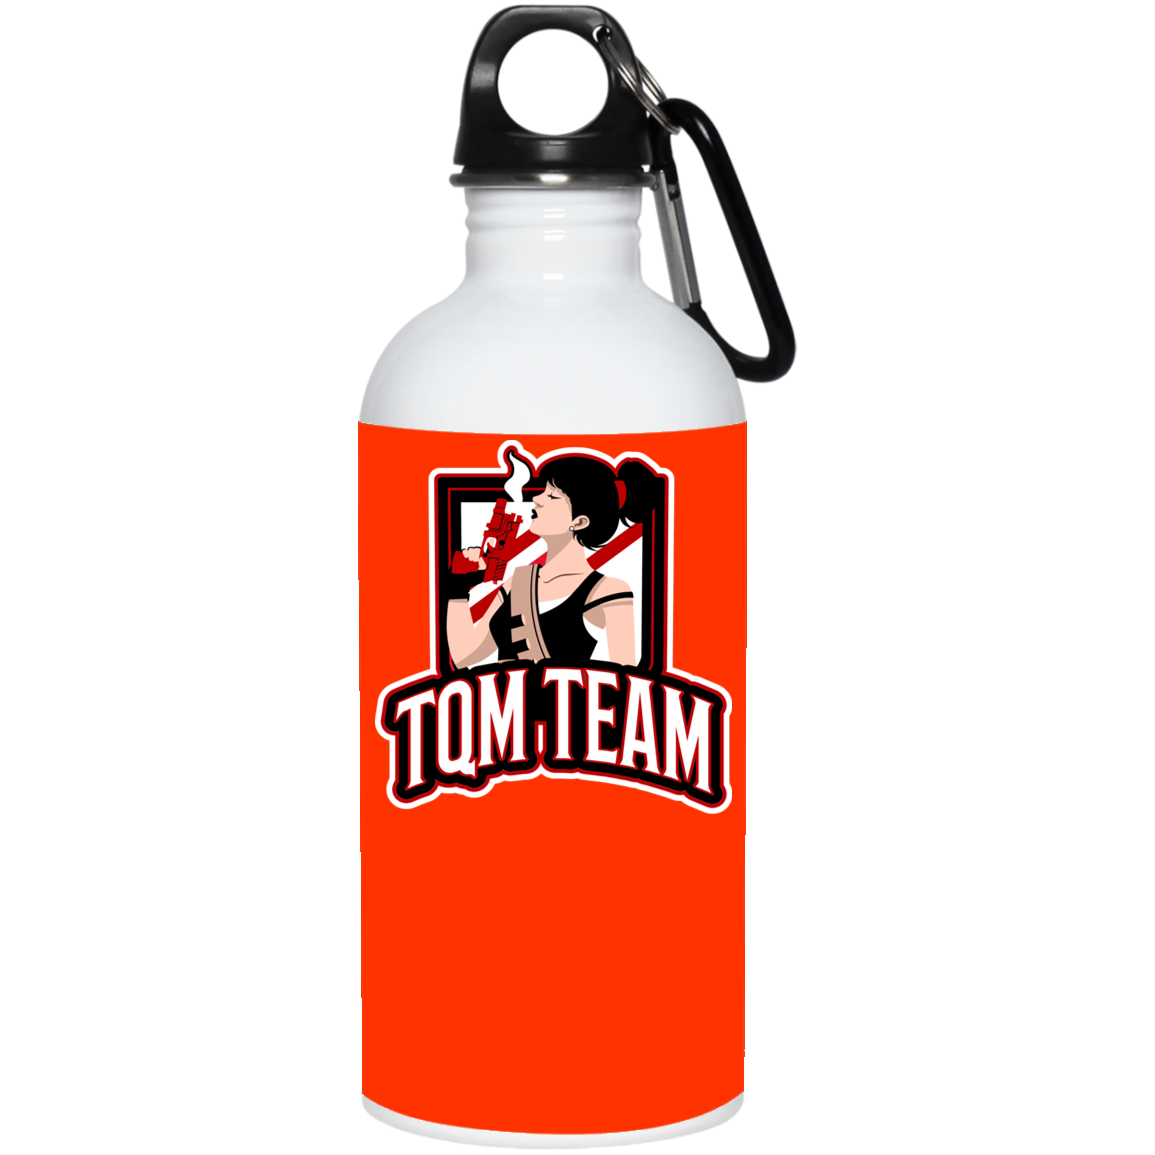 s-tqt STAINLESS STEEL WATER BOTTLE